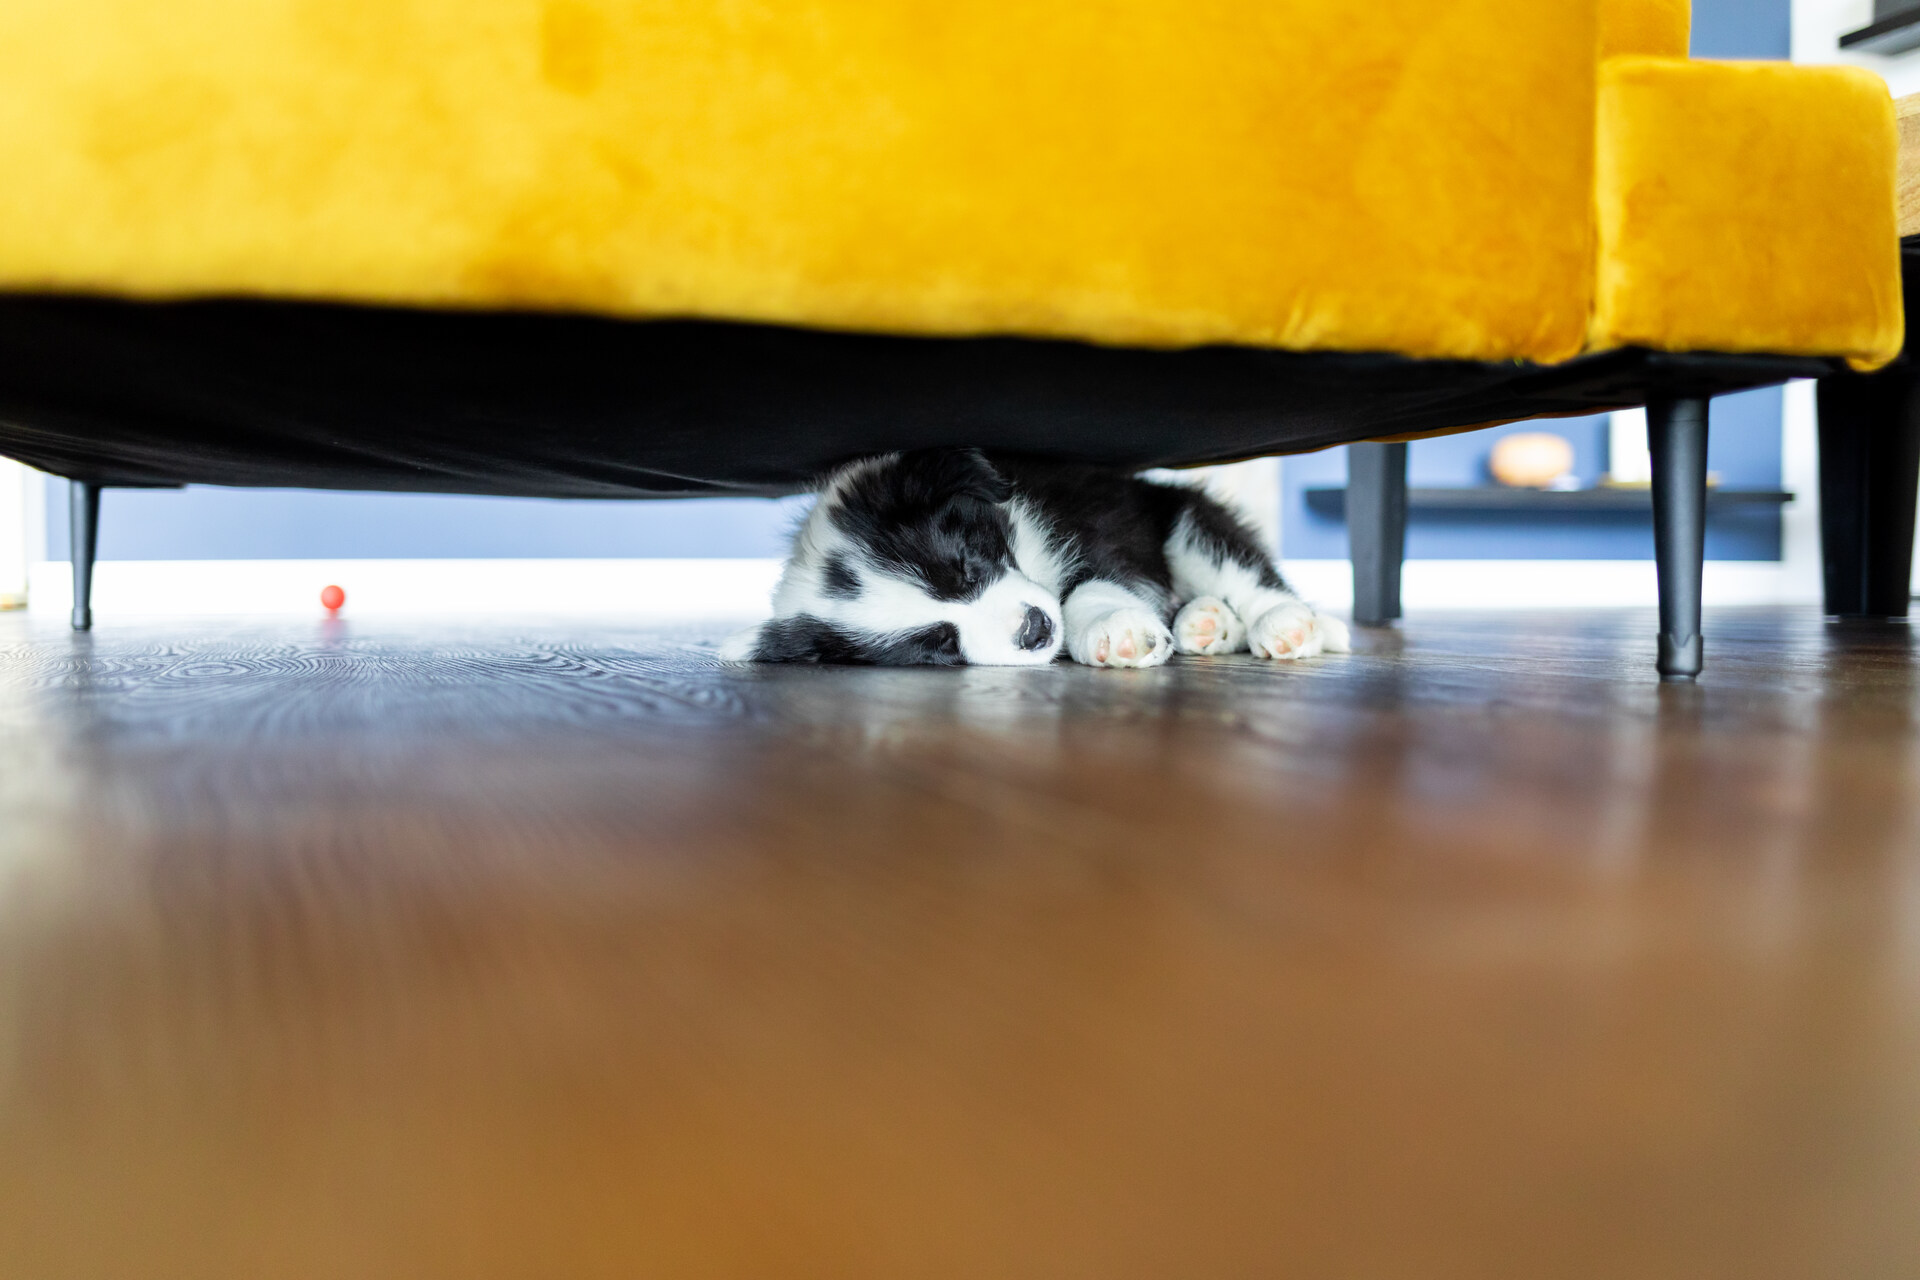 A small dog sleeping under a bed